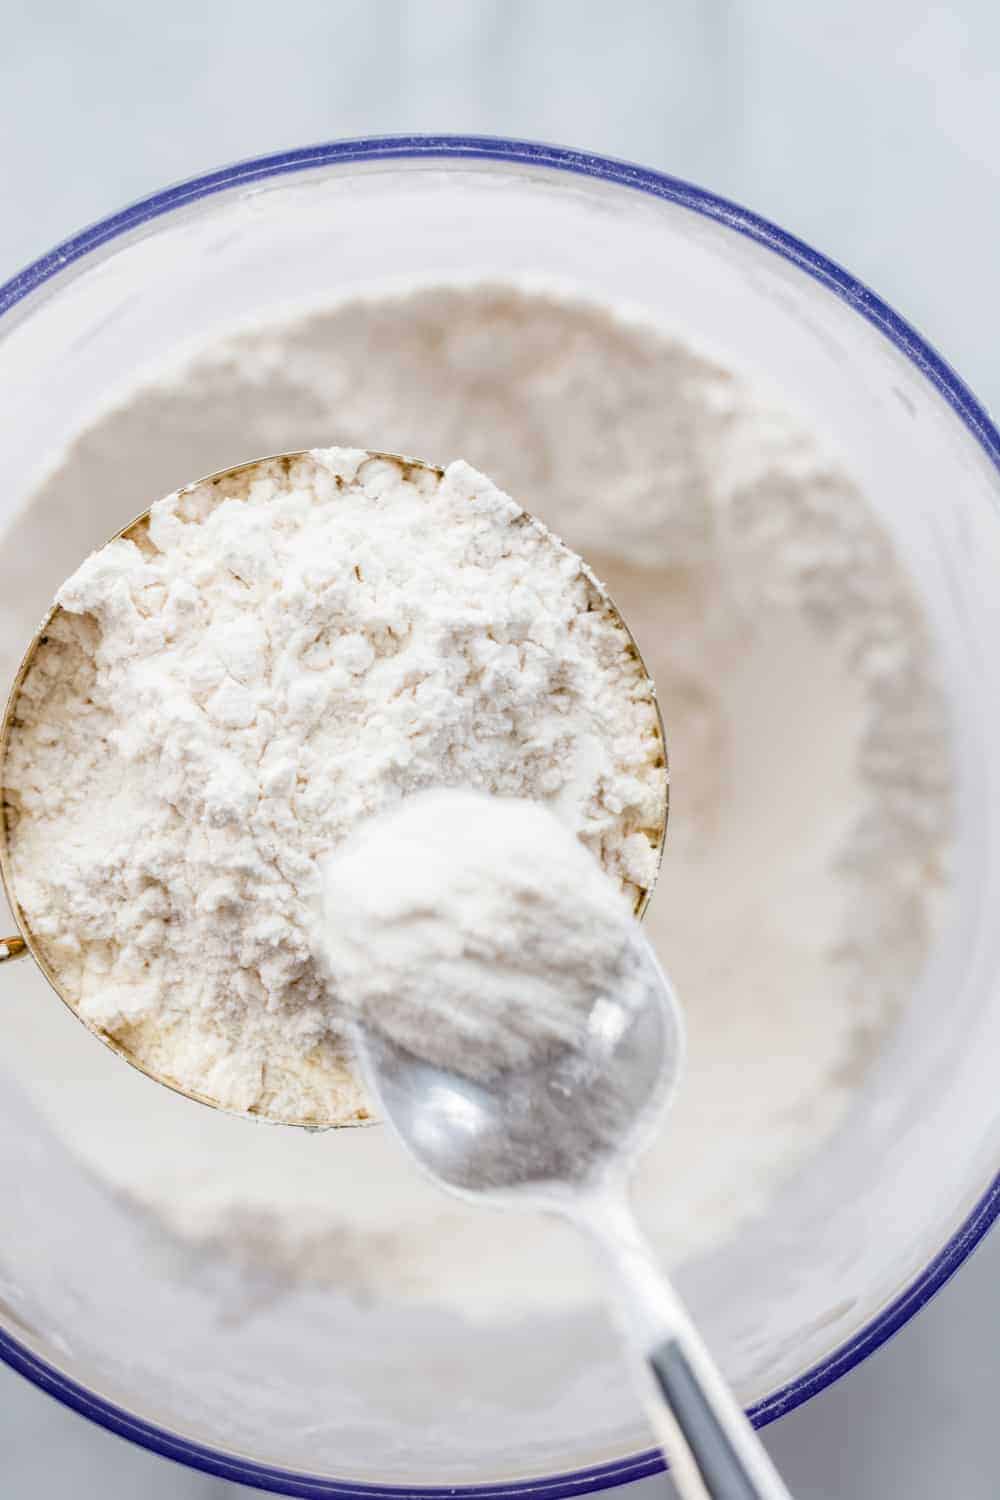 Silver spoon spooning flour into a brass measuring cup over a bowl of flour